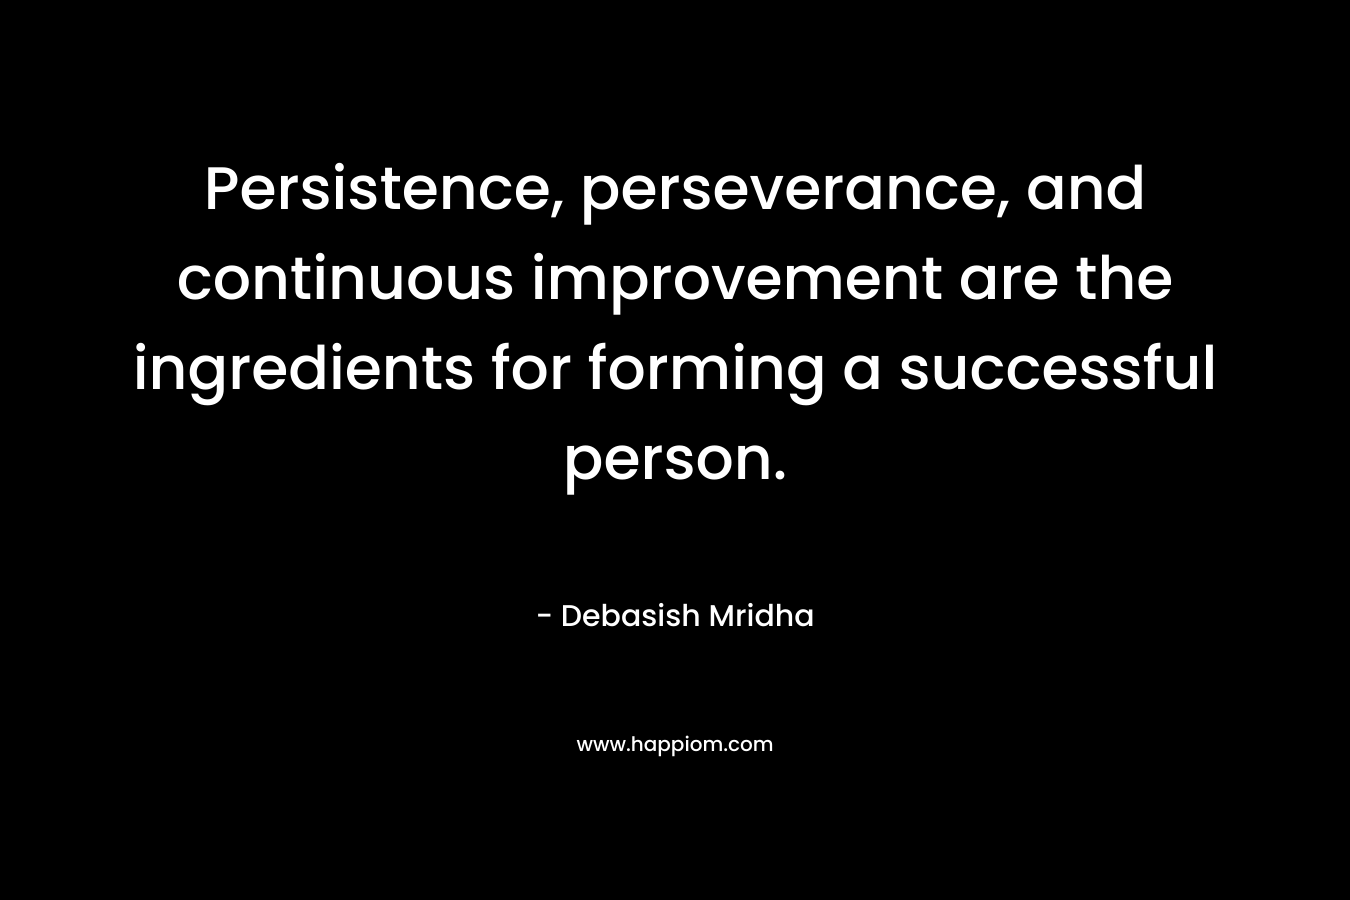 Persistence, perseverance, and continuous improvement are the ingredients for forming a successful person.